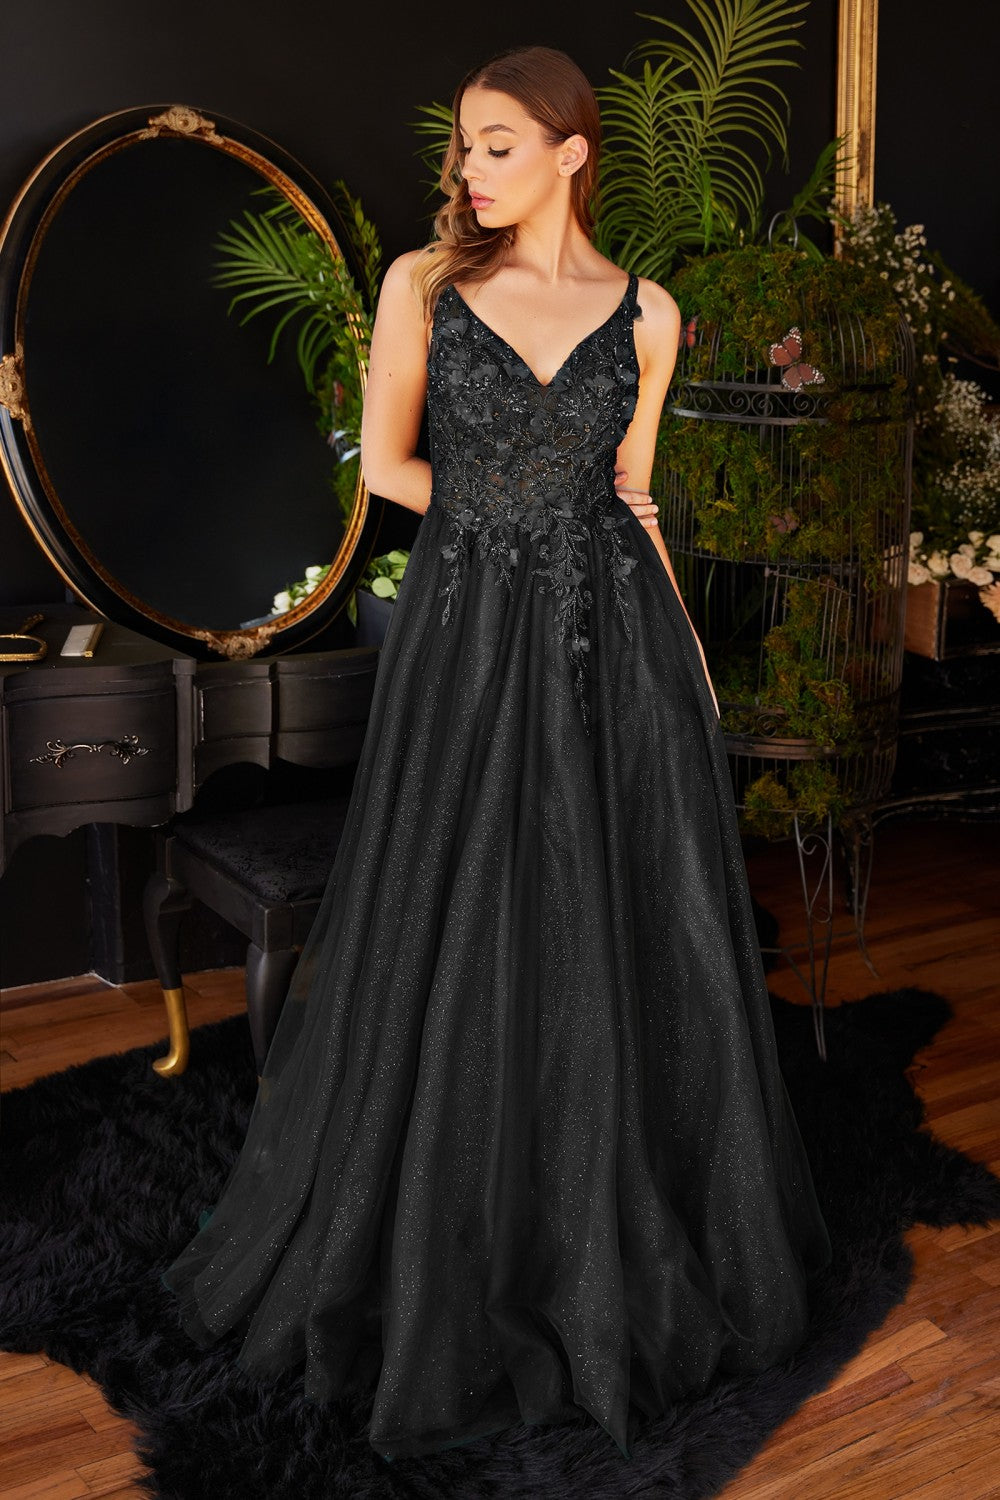 Lace Floral A-Line Prom & Bridesmaid Dress Vintage Applique Floral V-neck Bodice Boho Formal Ball Dress Gala Special Gown CDCD0181 Elsy Style Prom Dress